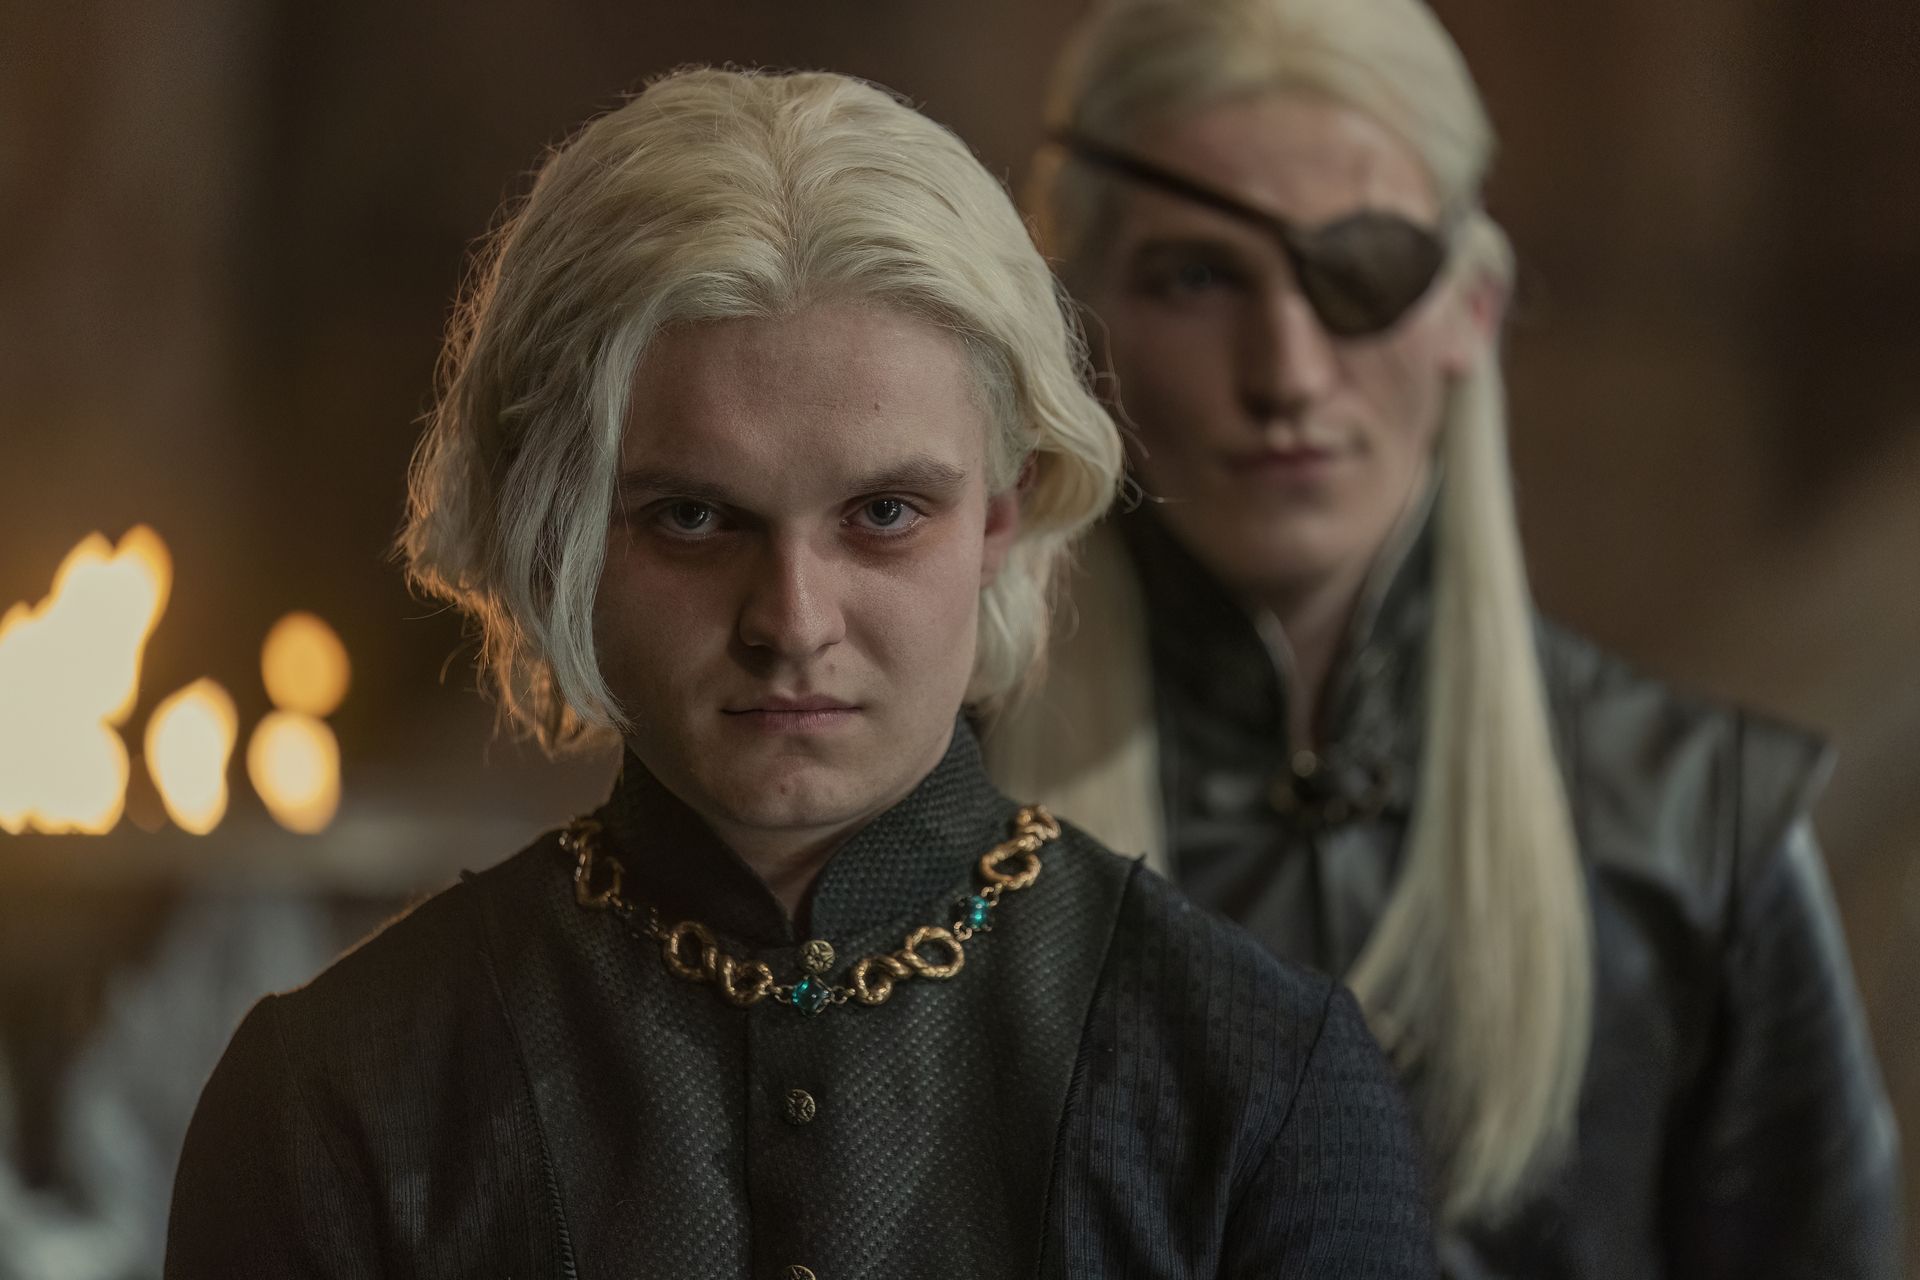 Aegon (Tom Glynn-Carney) scowls in a scene from HBO's 'House of the Dragon'